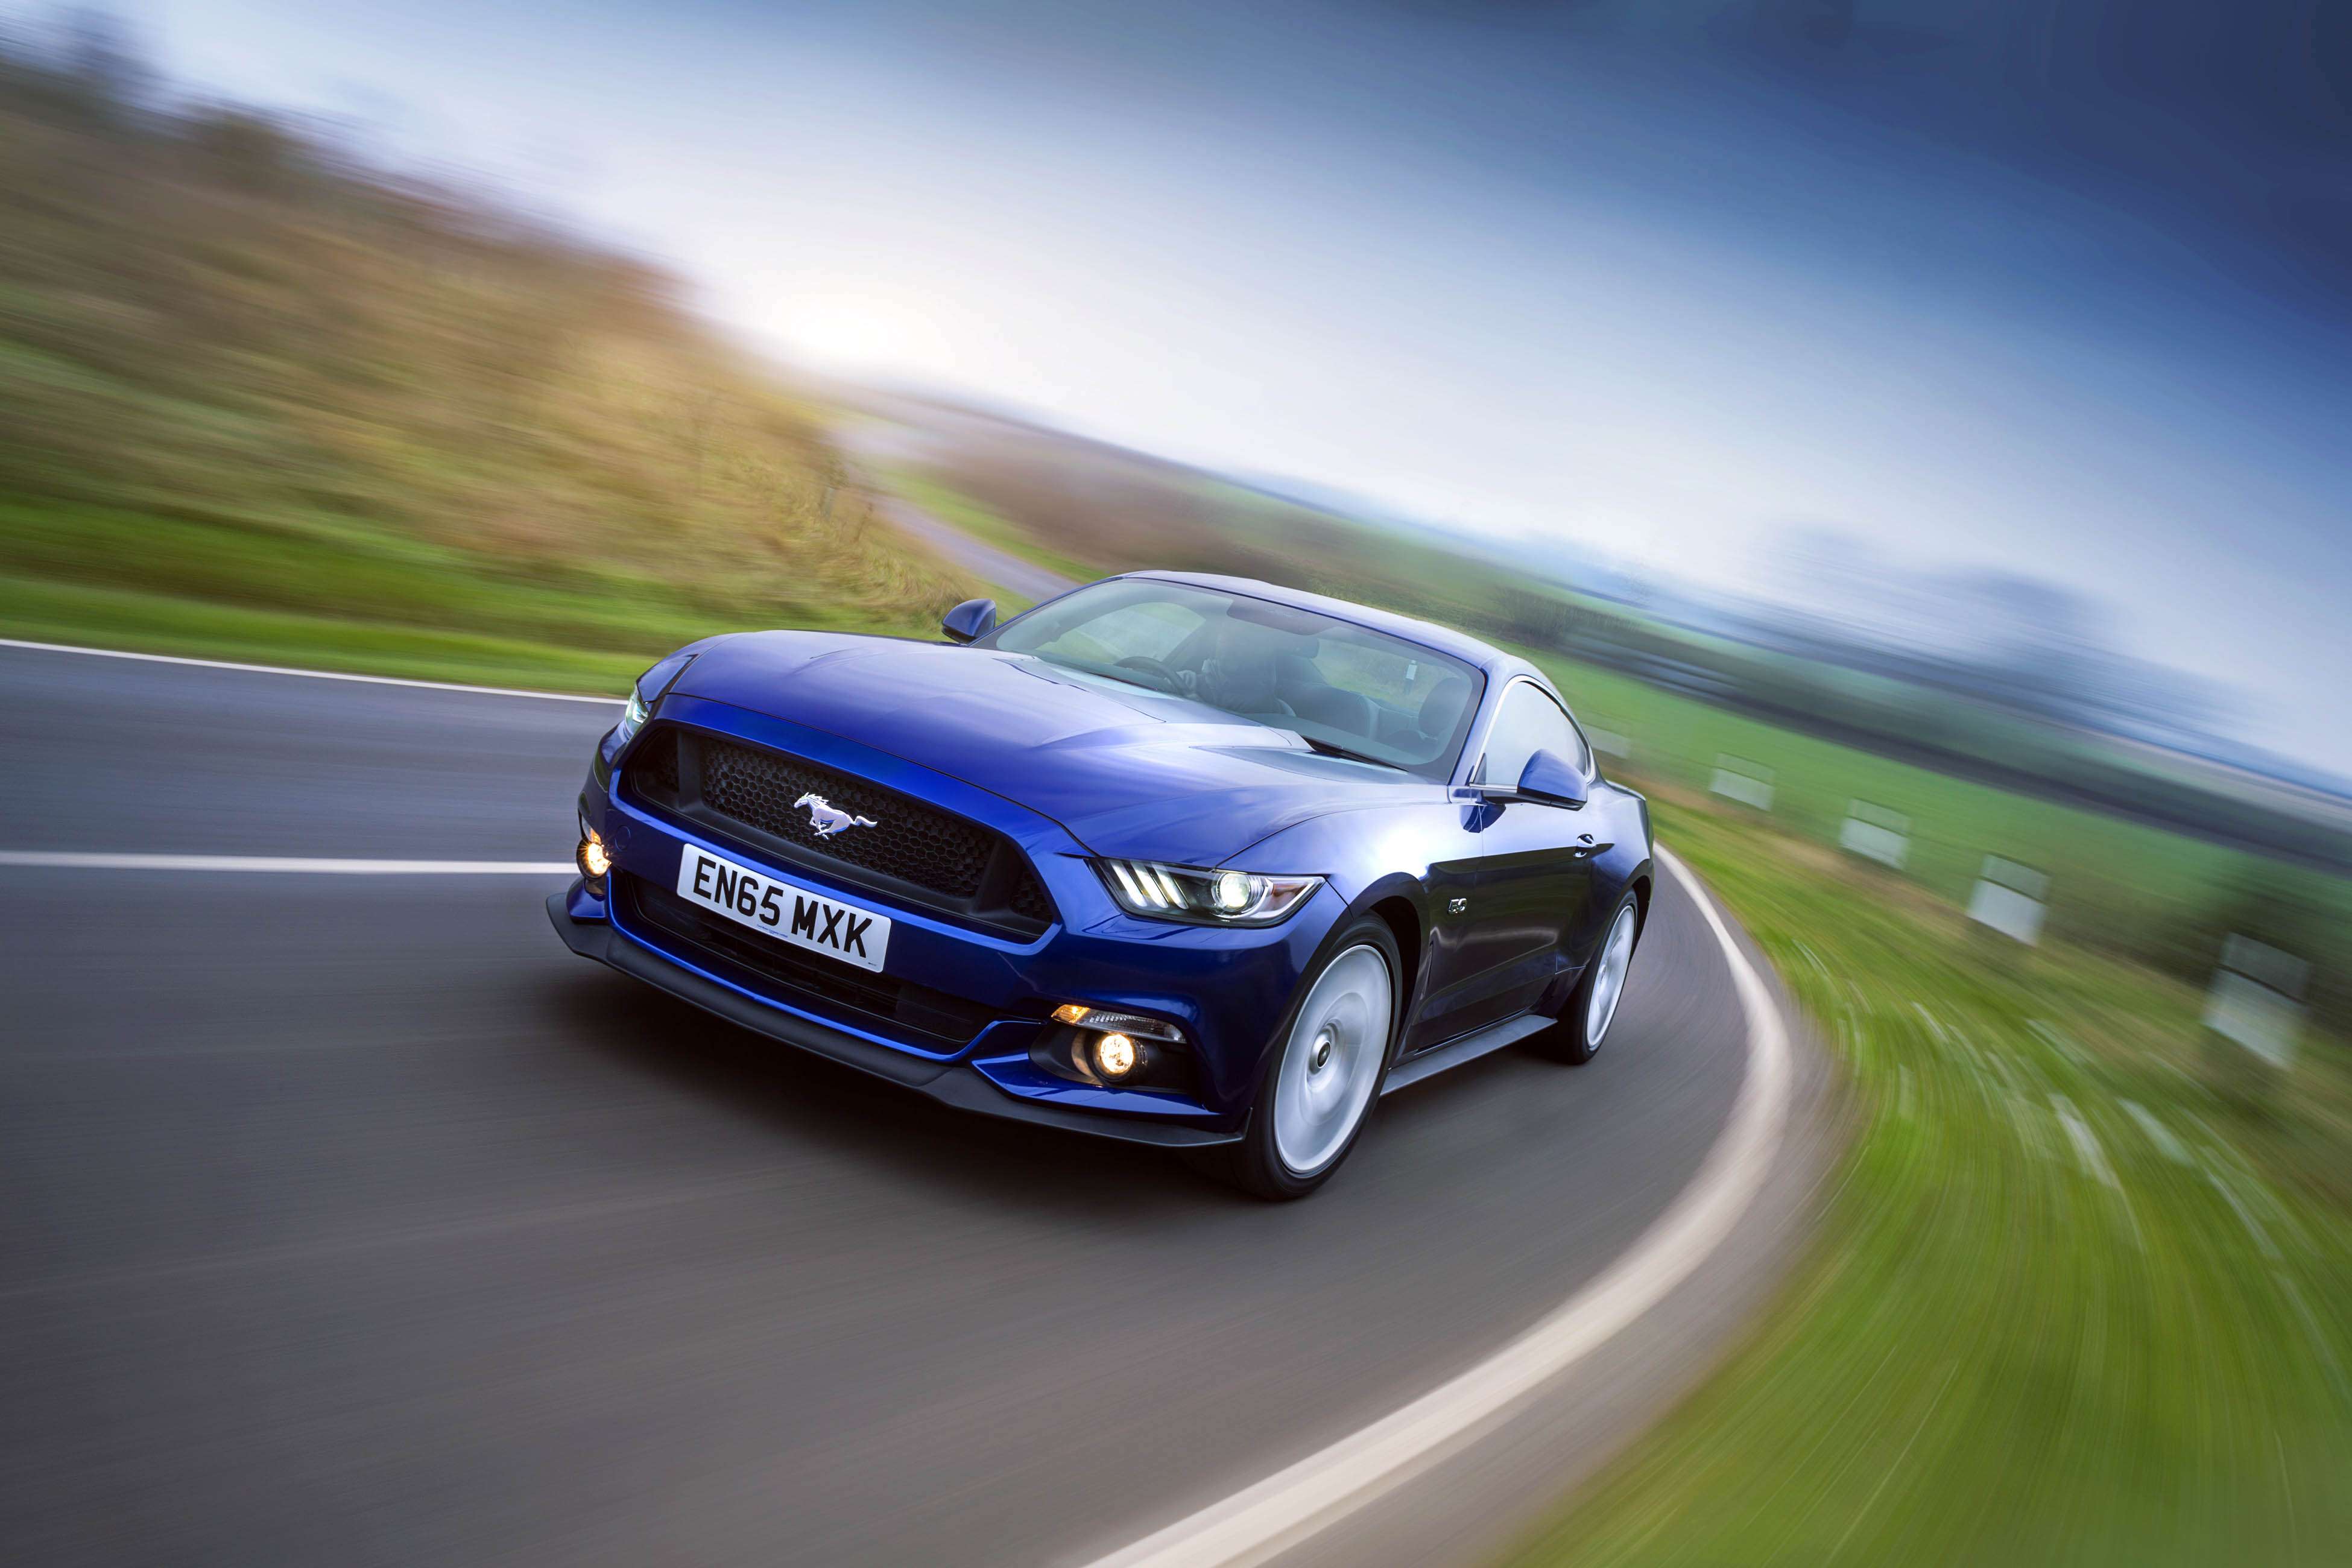 The Ford Mustang: “435 horses concealed somewhere in its power plant, beasts that didn’t so much neigh and whinny as spit fire and roar.” Photo: Newspress